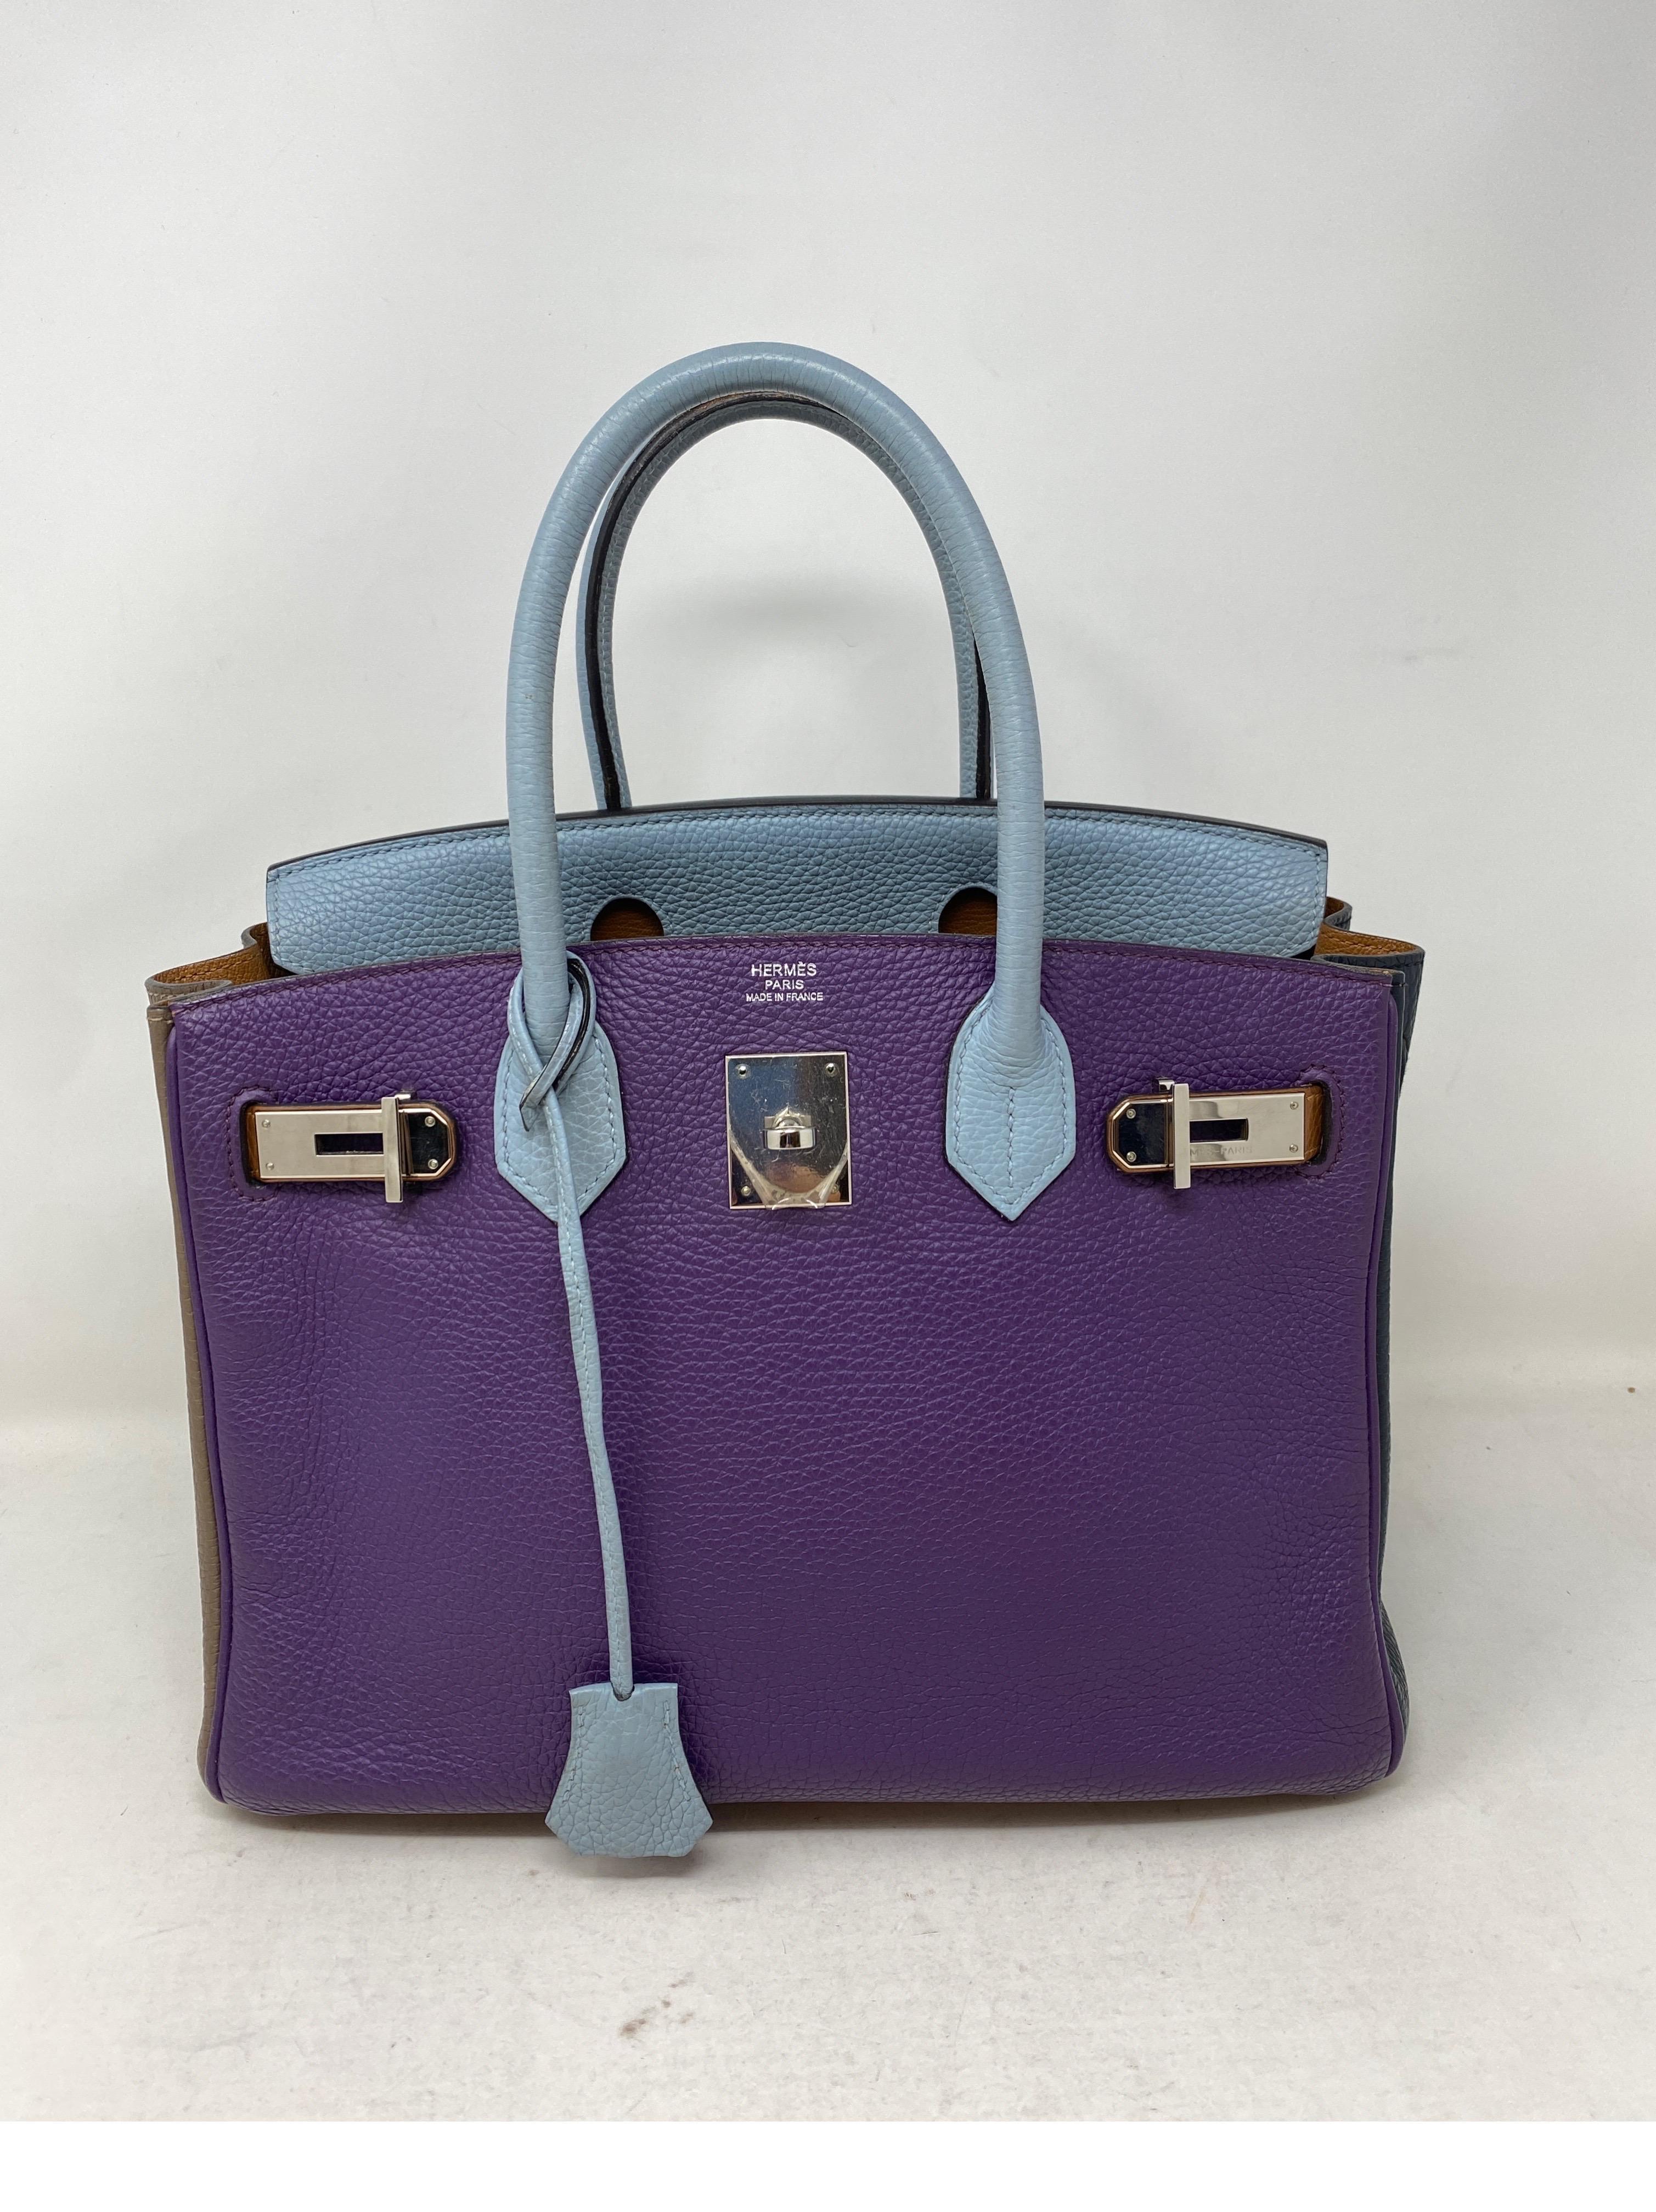 Hermes Birkin 30 Multi-color Bag. Rare and limited Birkin 30. Purple, light blue, brown and navy colors. Palladium hardware. Good condition. Light wear on handles. Stunning bag. Includes clochette, lock, keys, and dust cover. Guaranteed authentic. 